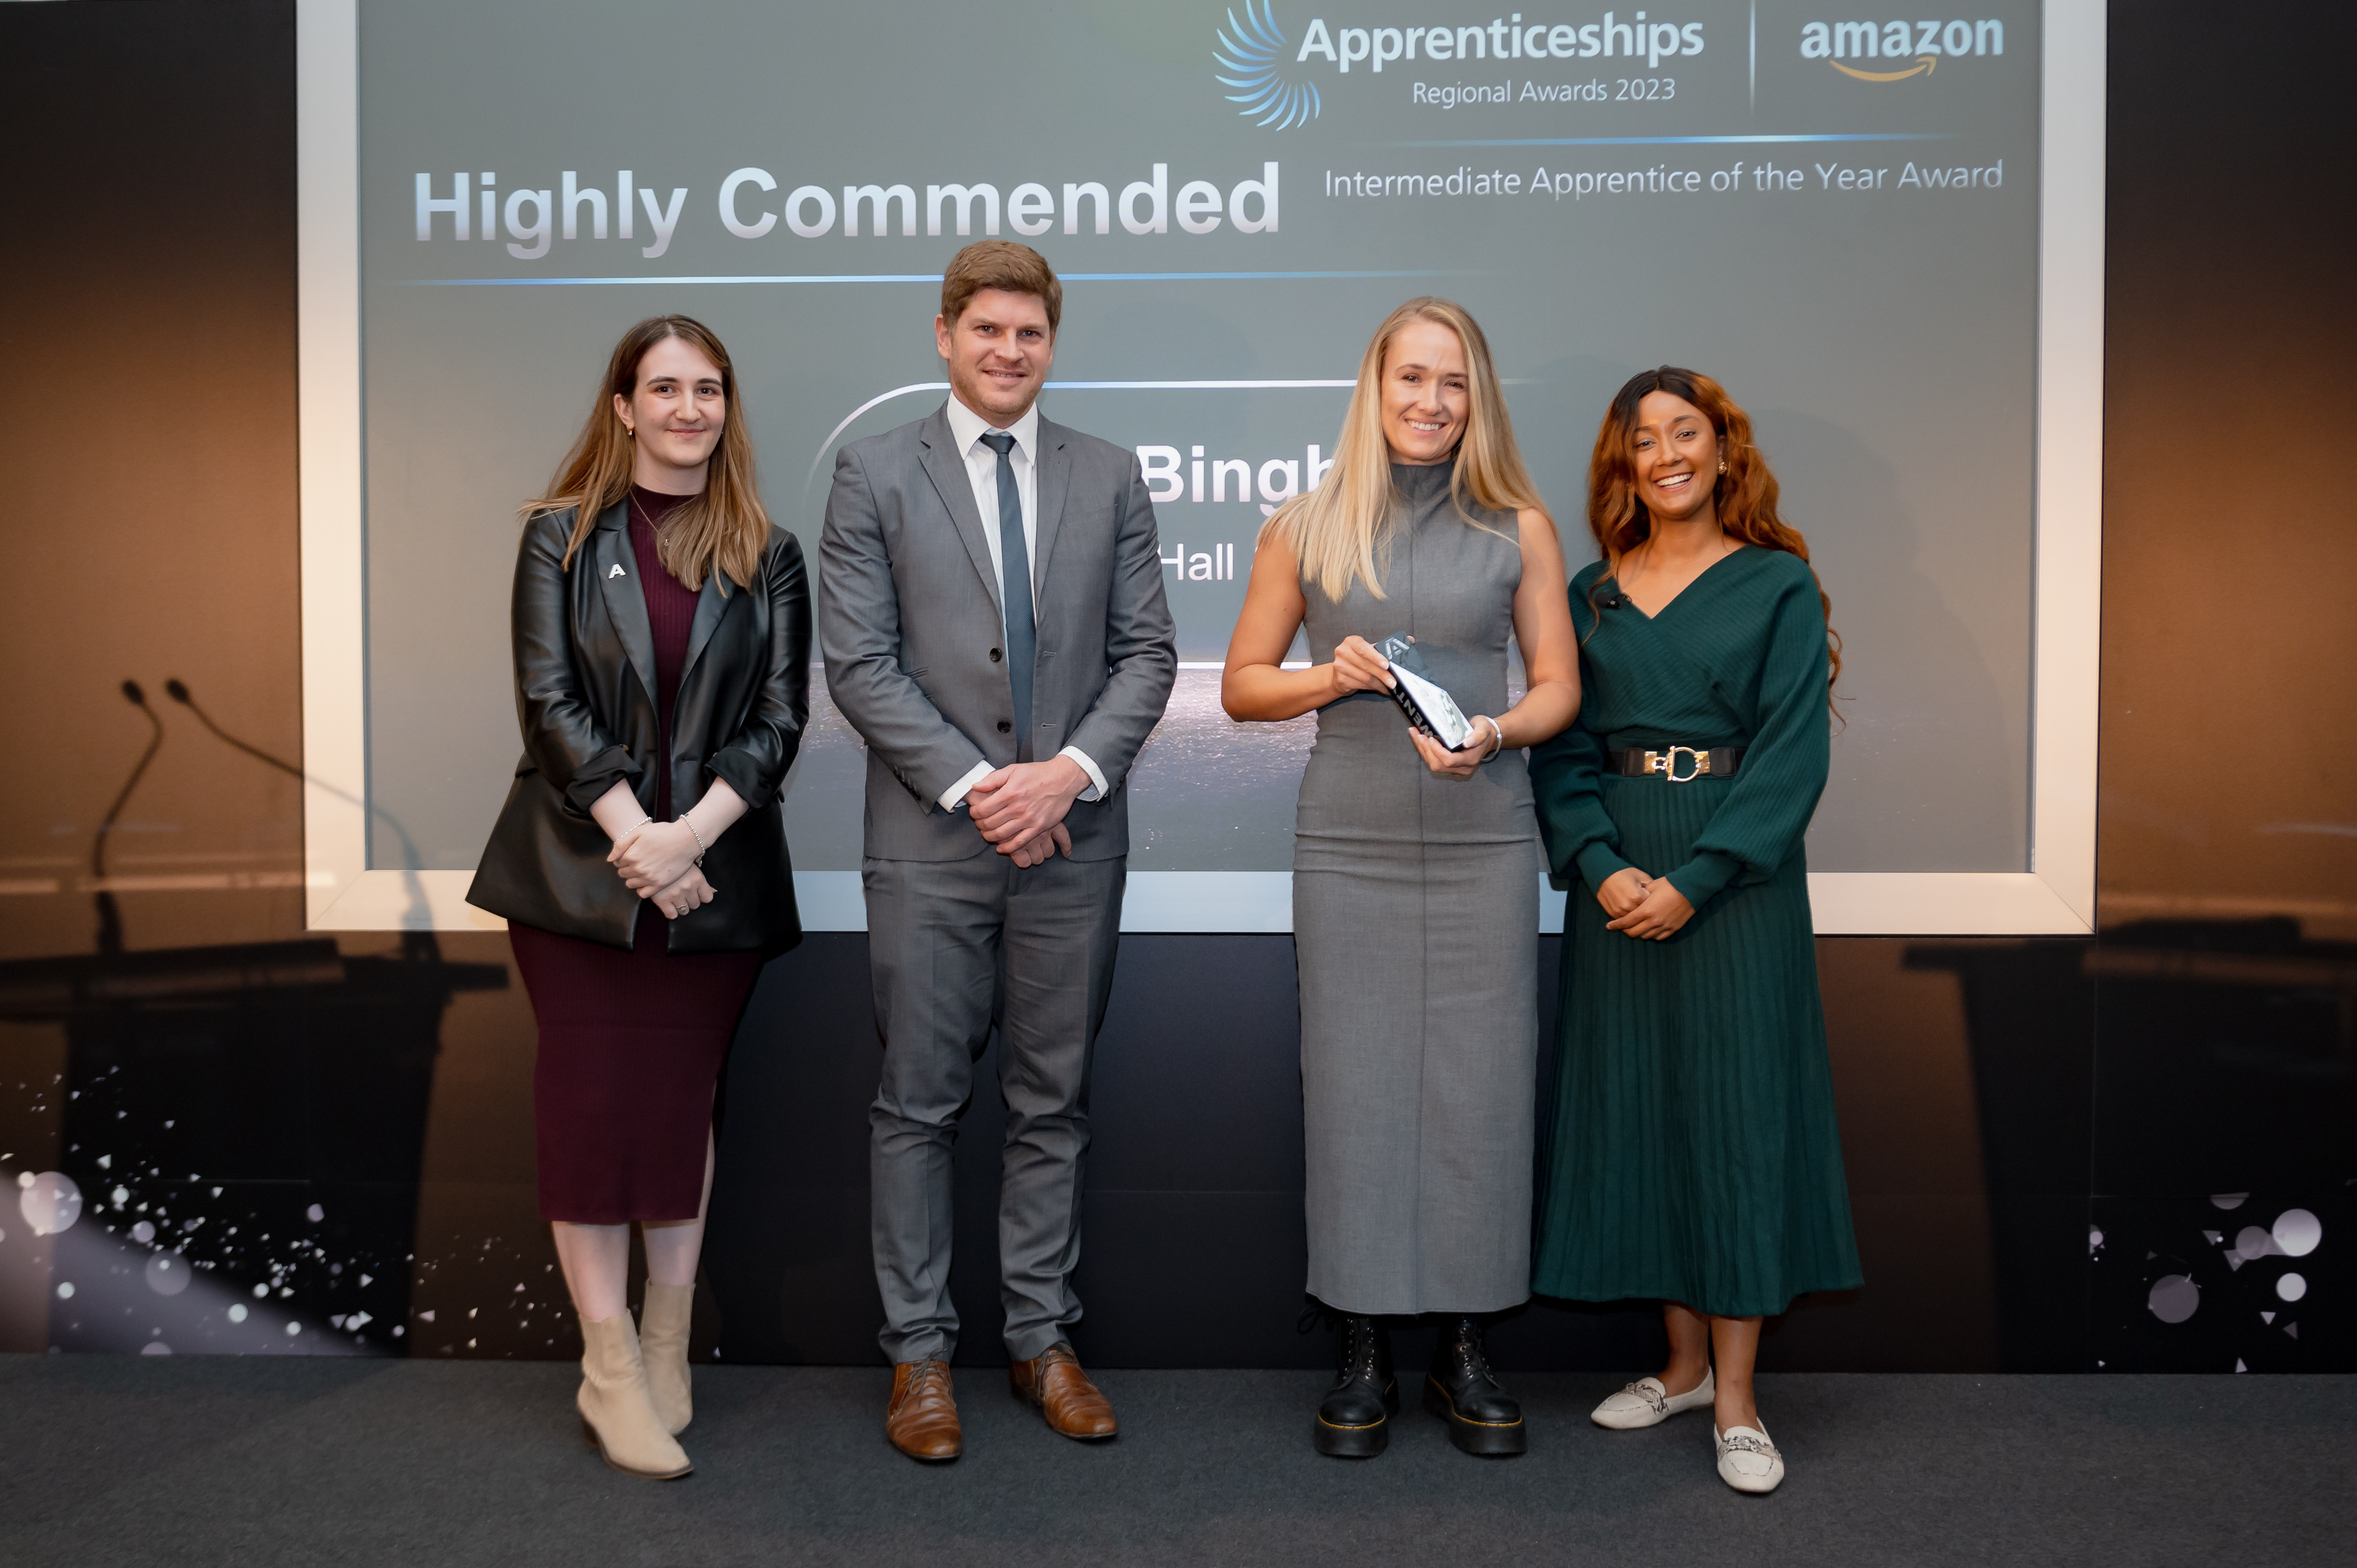 James Hall & Co. Ltd Recruitment Coordinator wins Highly Commended Apprenticeship Award